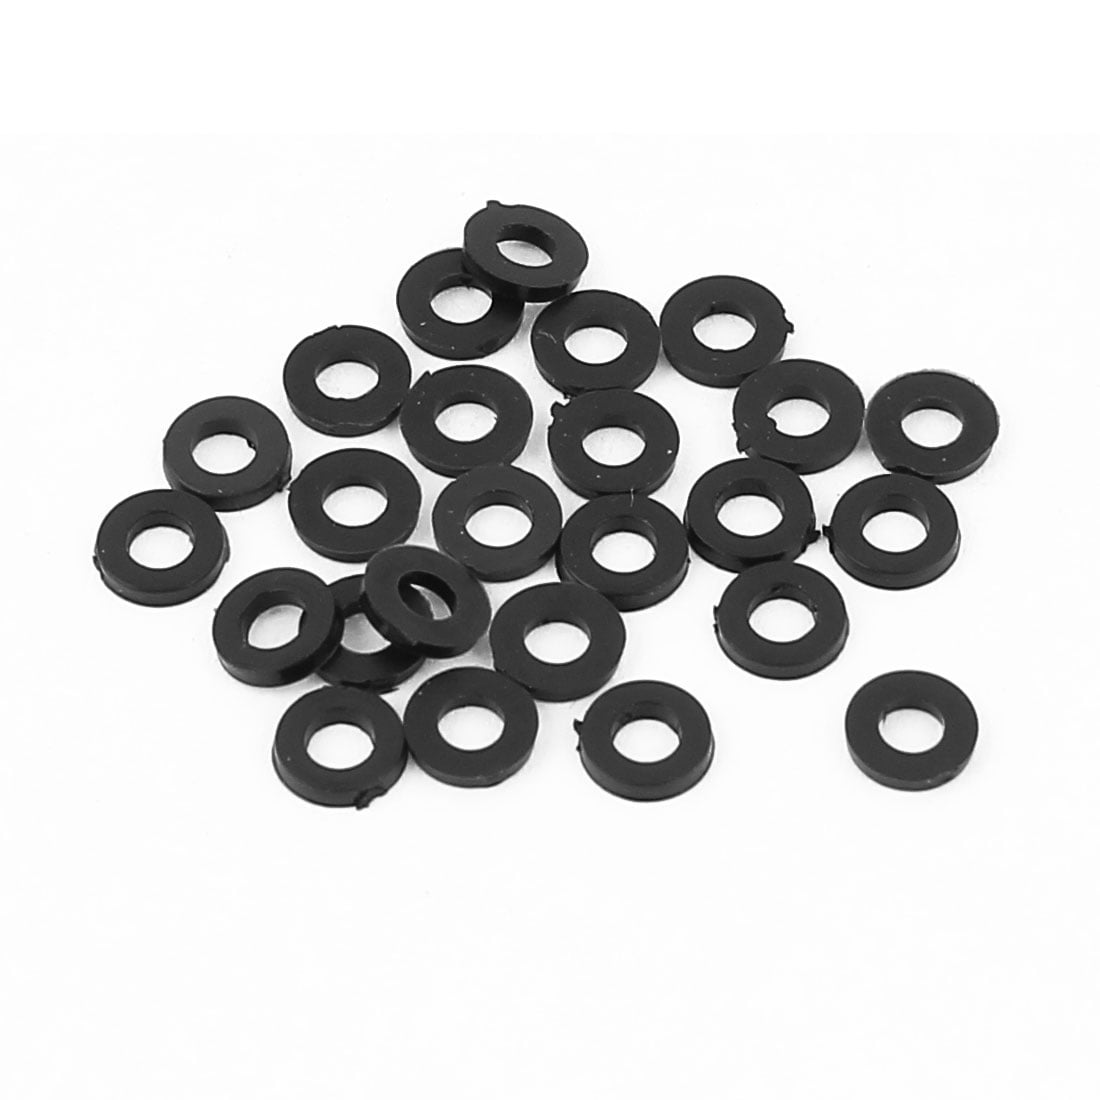 New Multiple Metric Copper flat gasket sealing ring Crush washer for boat 50PCS 